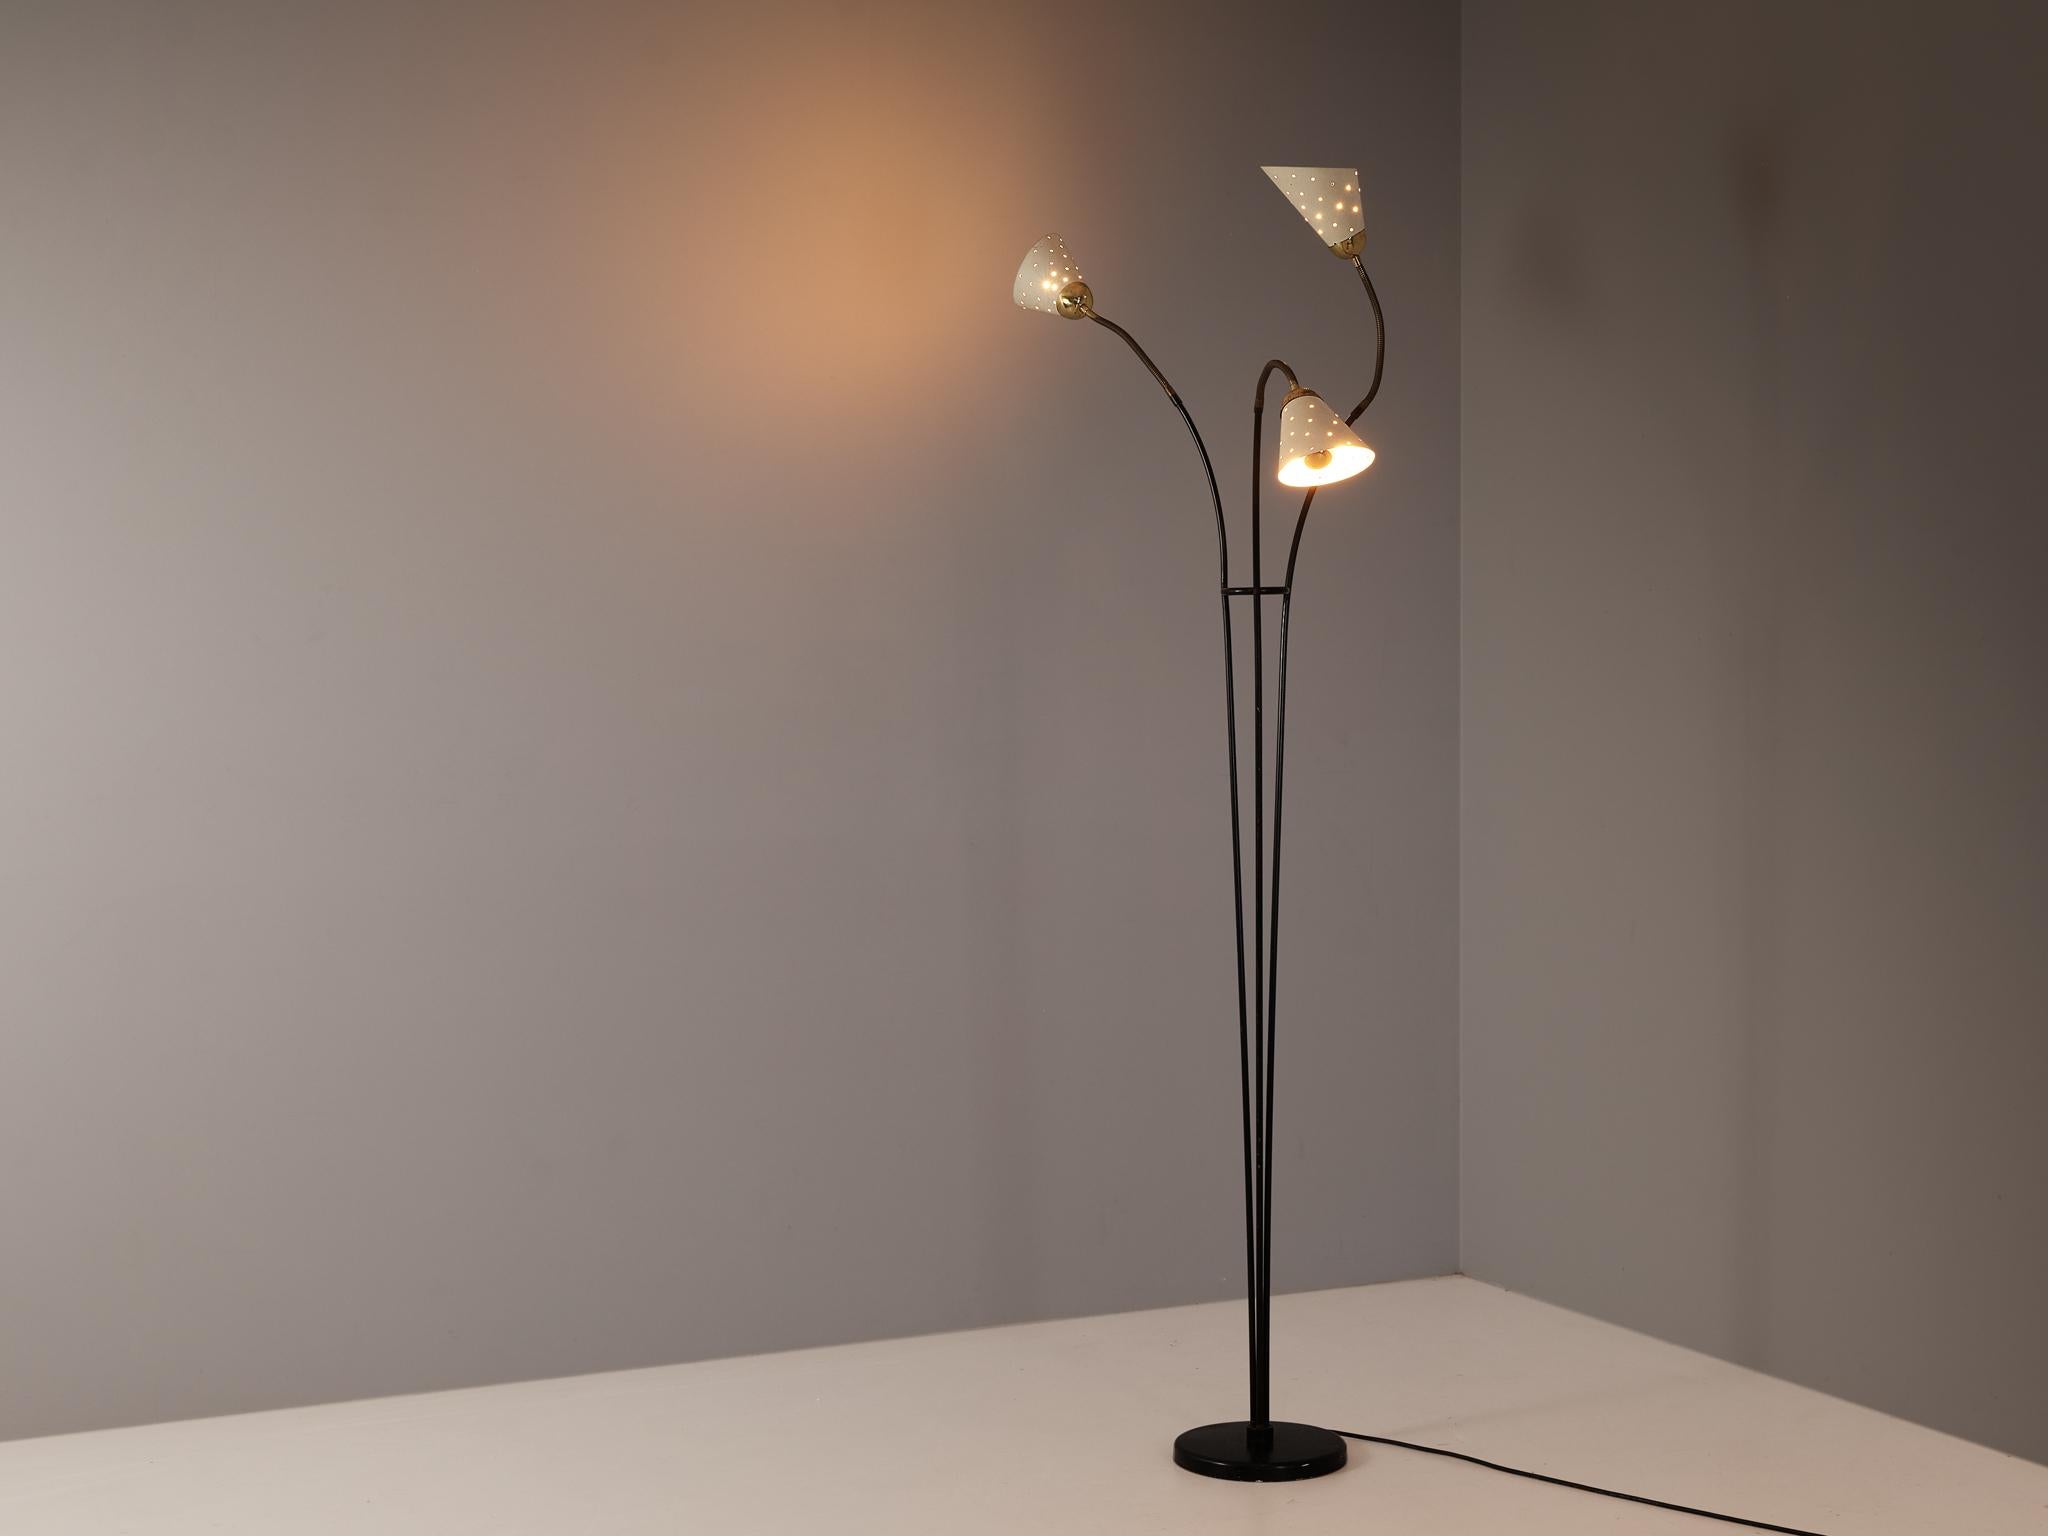 Floor lamp, brass, metal, aluminum, Europe, 1950s. 

A floor lamp with three gracefully extended arms. Its design showcases a round base lacquered in black, from which three slender stems gracefully emerge. The upper sections of the stems and shade